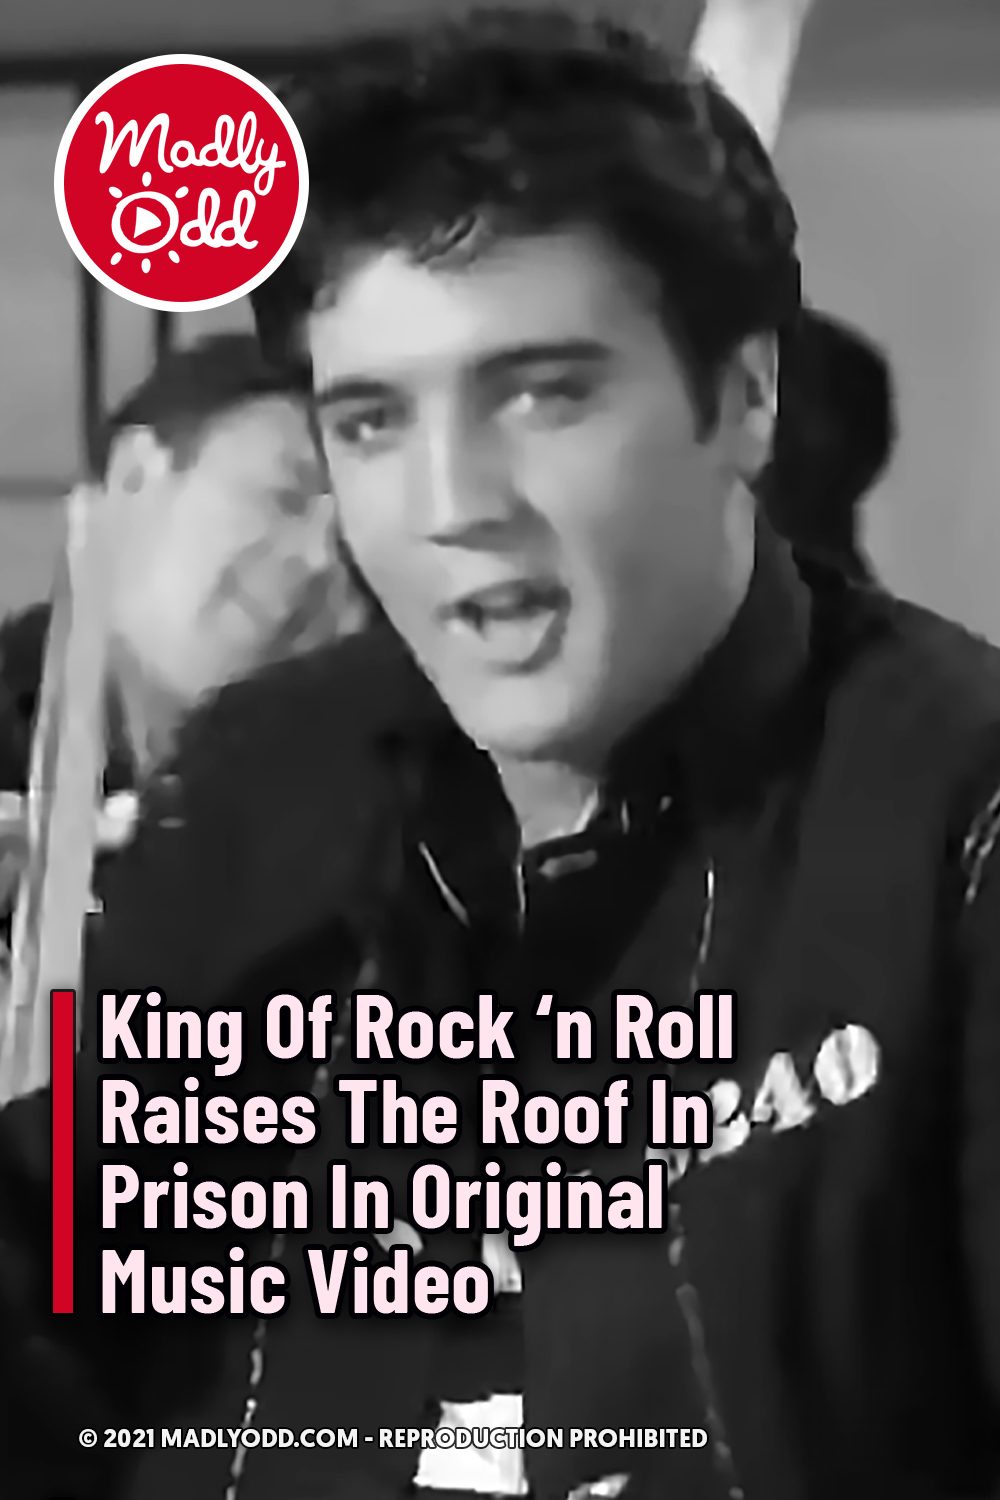 King Of Rock ‘n Roll Raises The Roof In Prison In Original Music Video